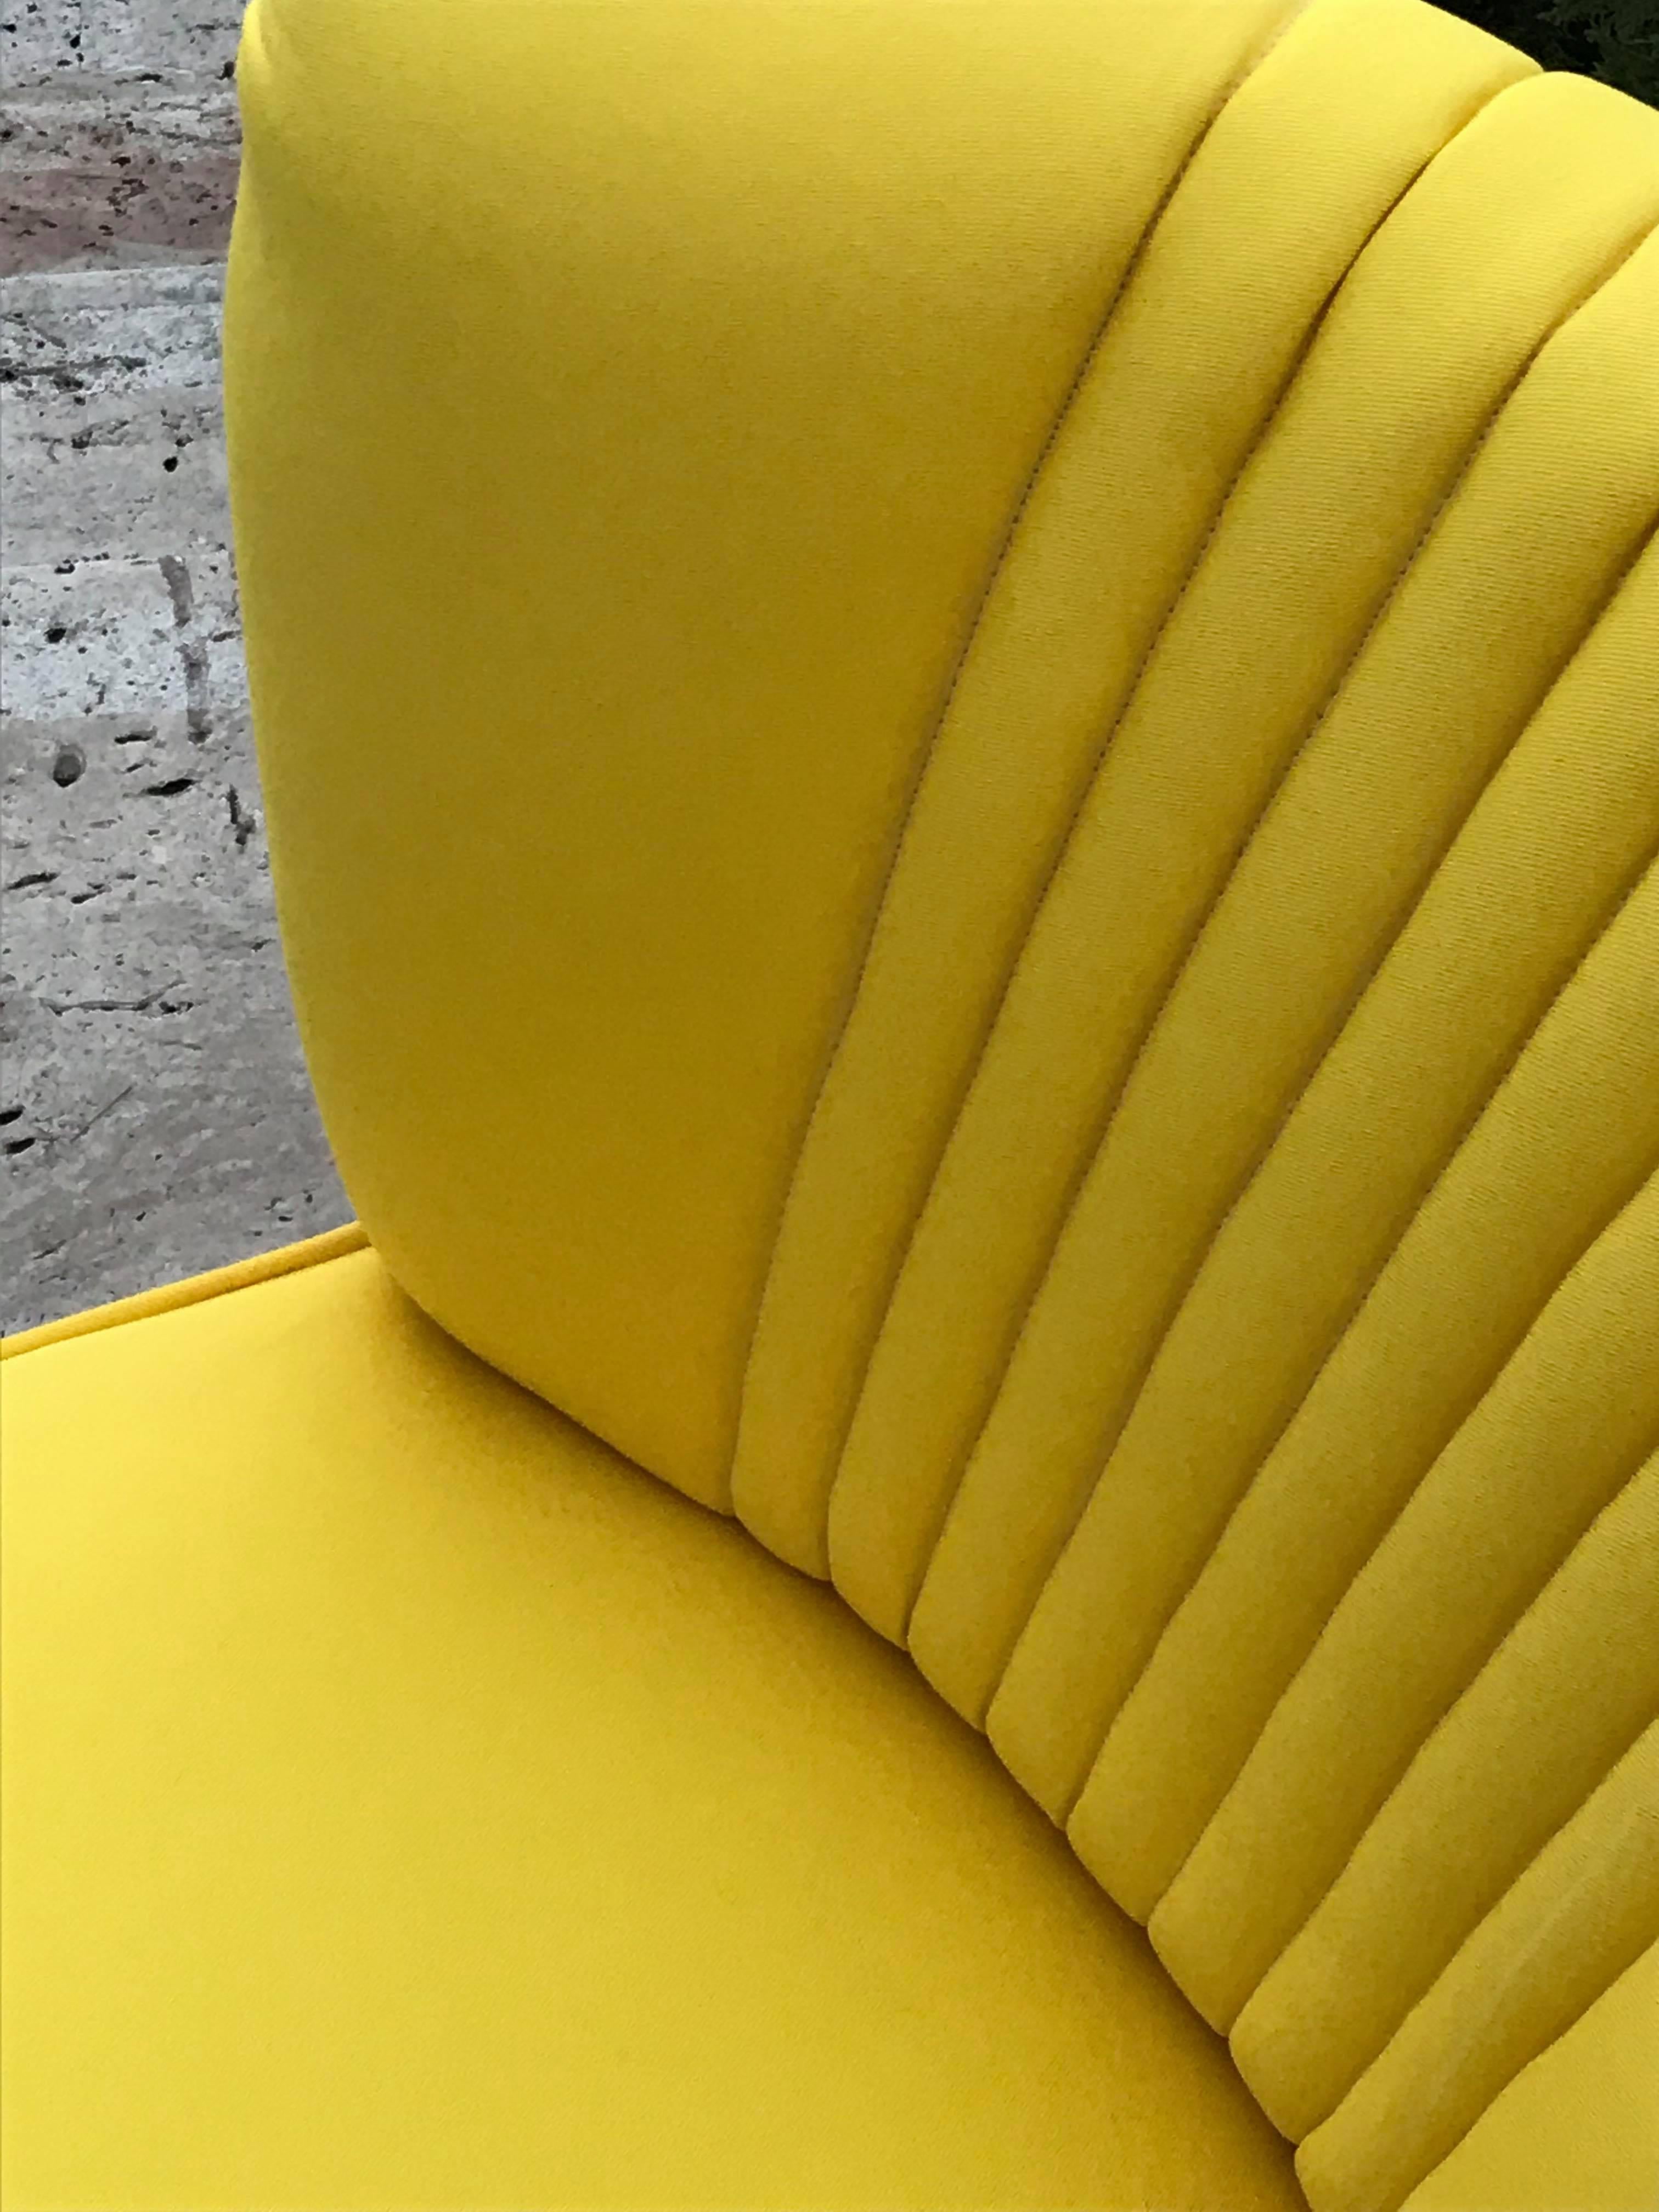 1950s Cocktail Chair Yellow Fabric For Sale 4